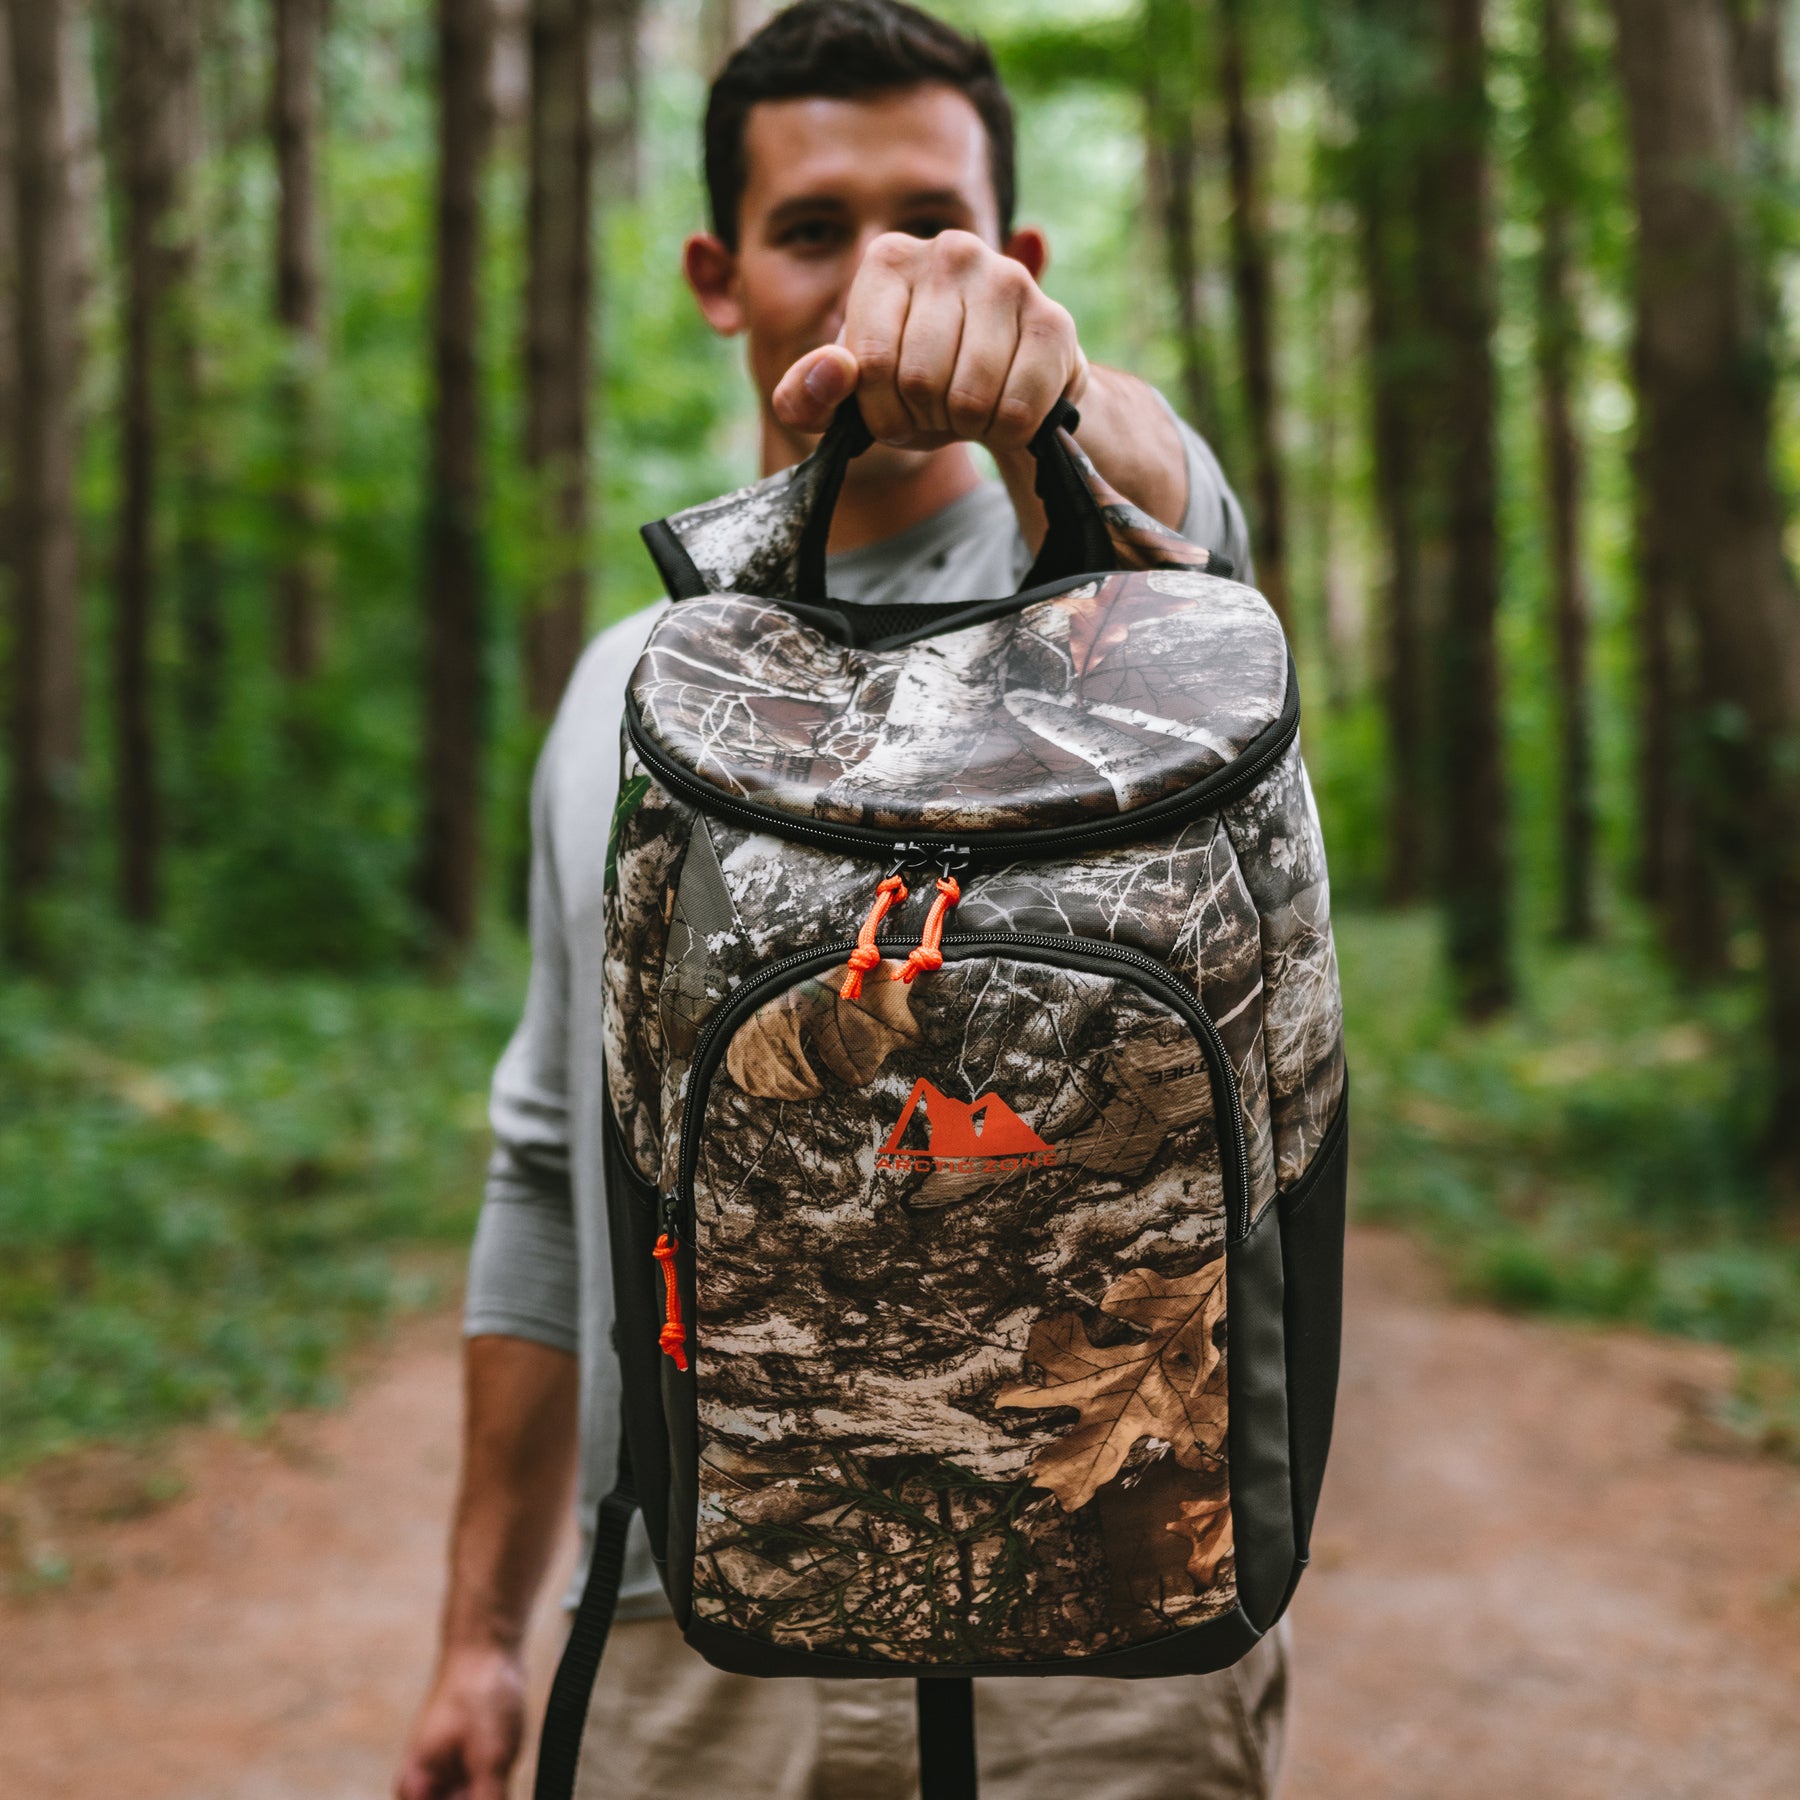 Camp-Zero 20-Can Carry All Backpack Cooler in Camo